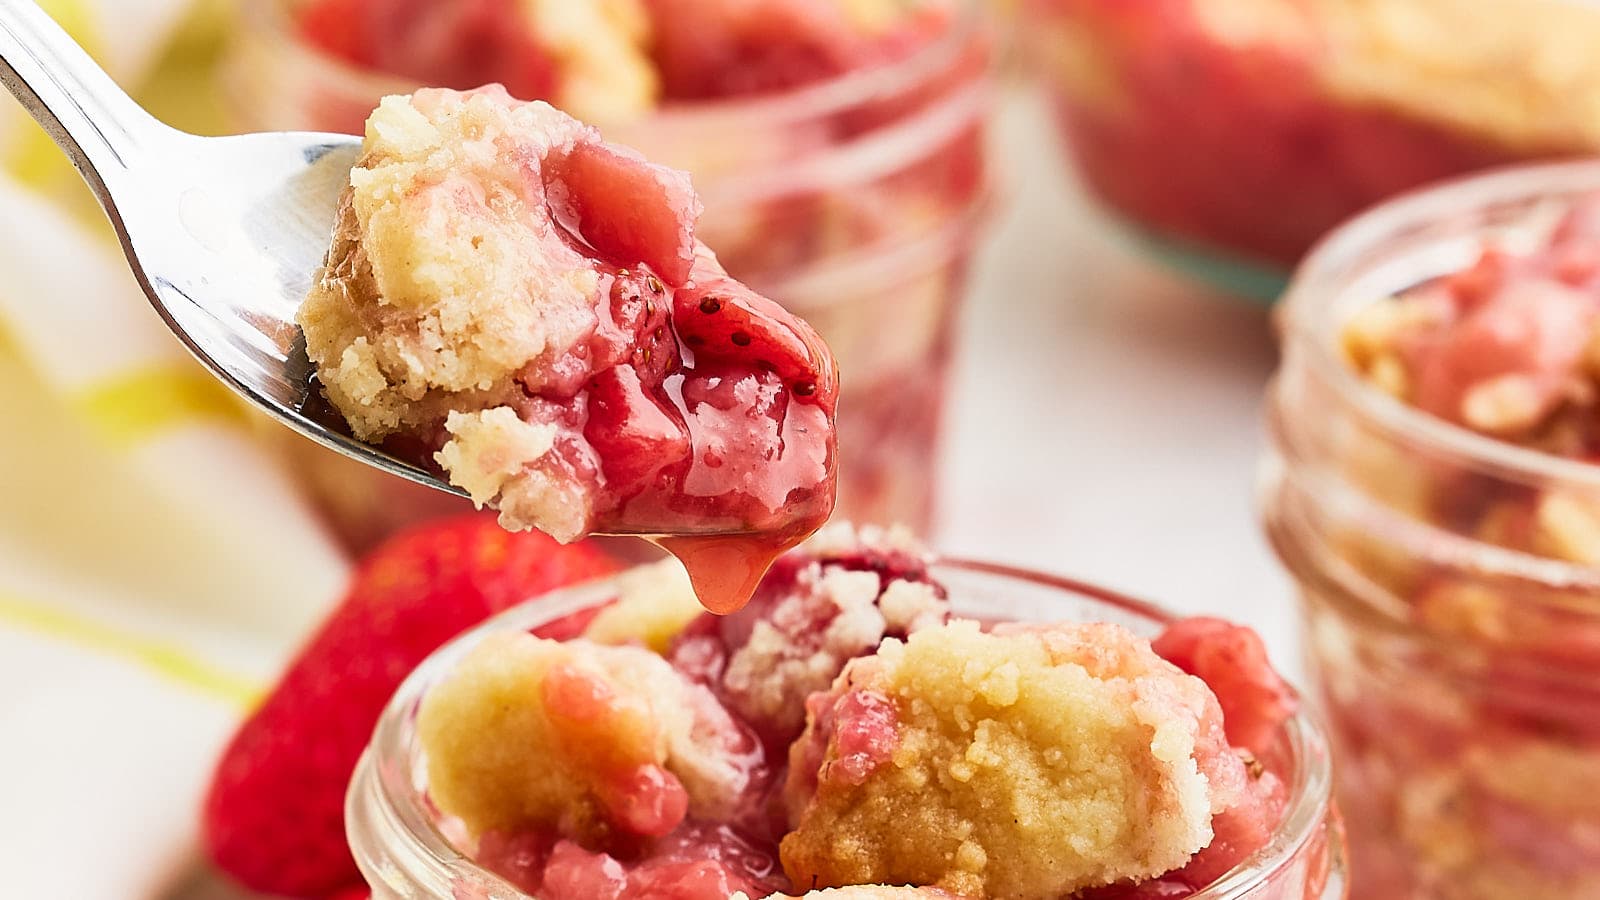 Strawberry Dump Cake recipe by Cheerful Cook.